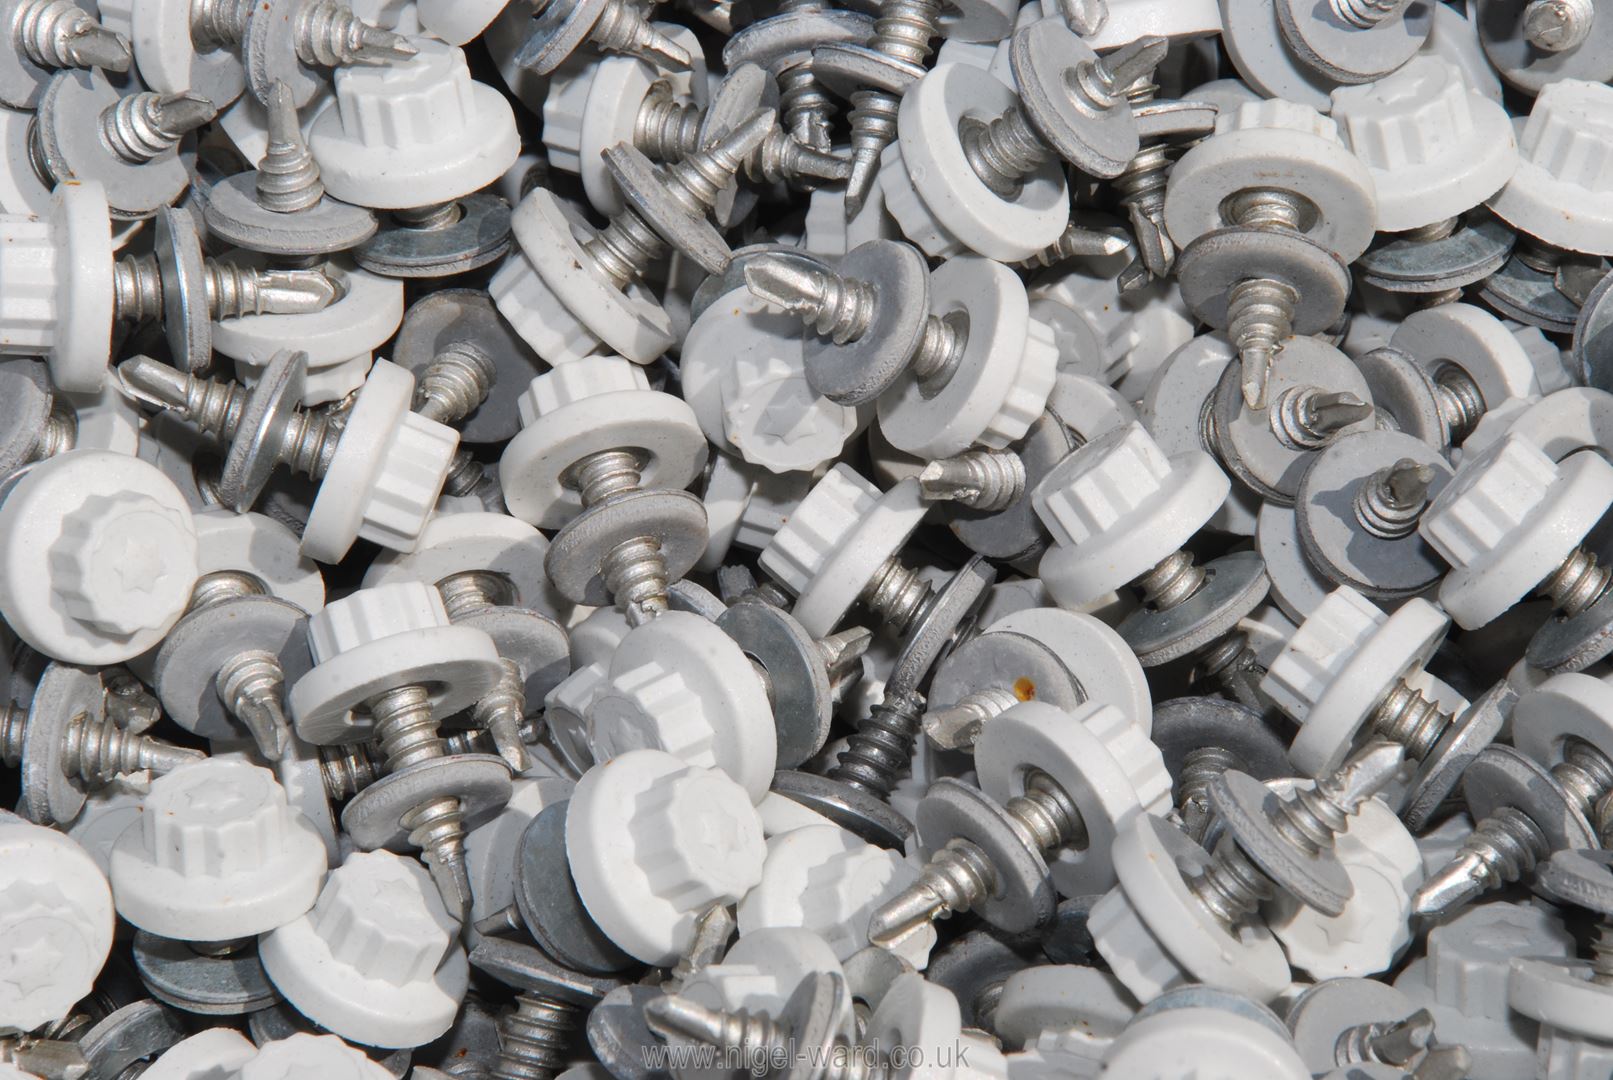 A large quantity of Tek screws with hexagonal heads, 25 mm. - Image 2 of 2